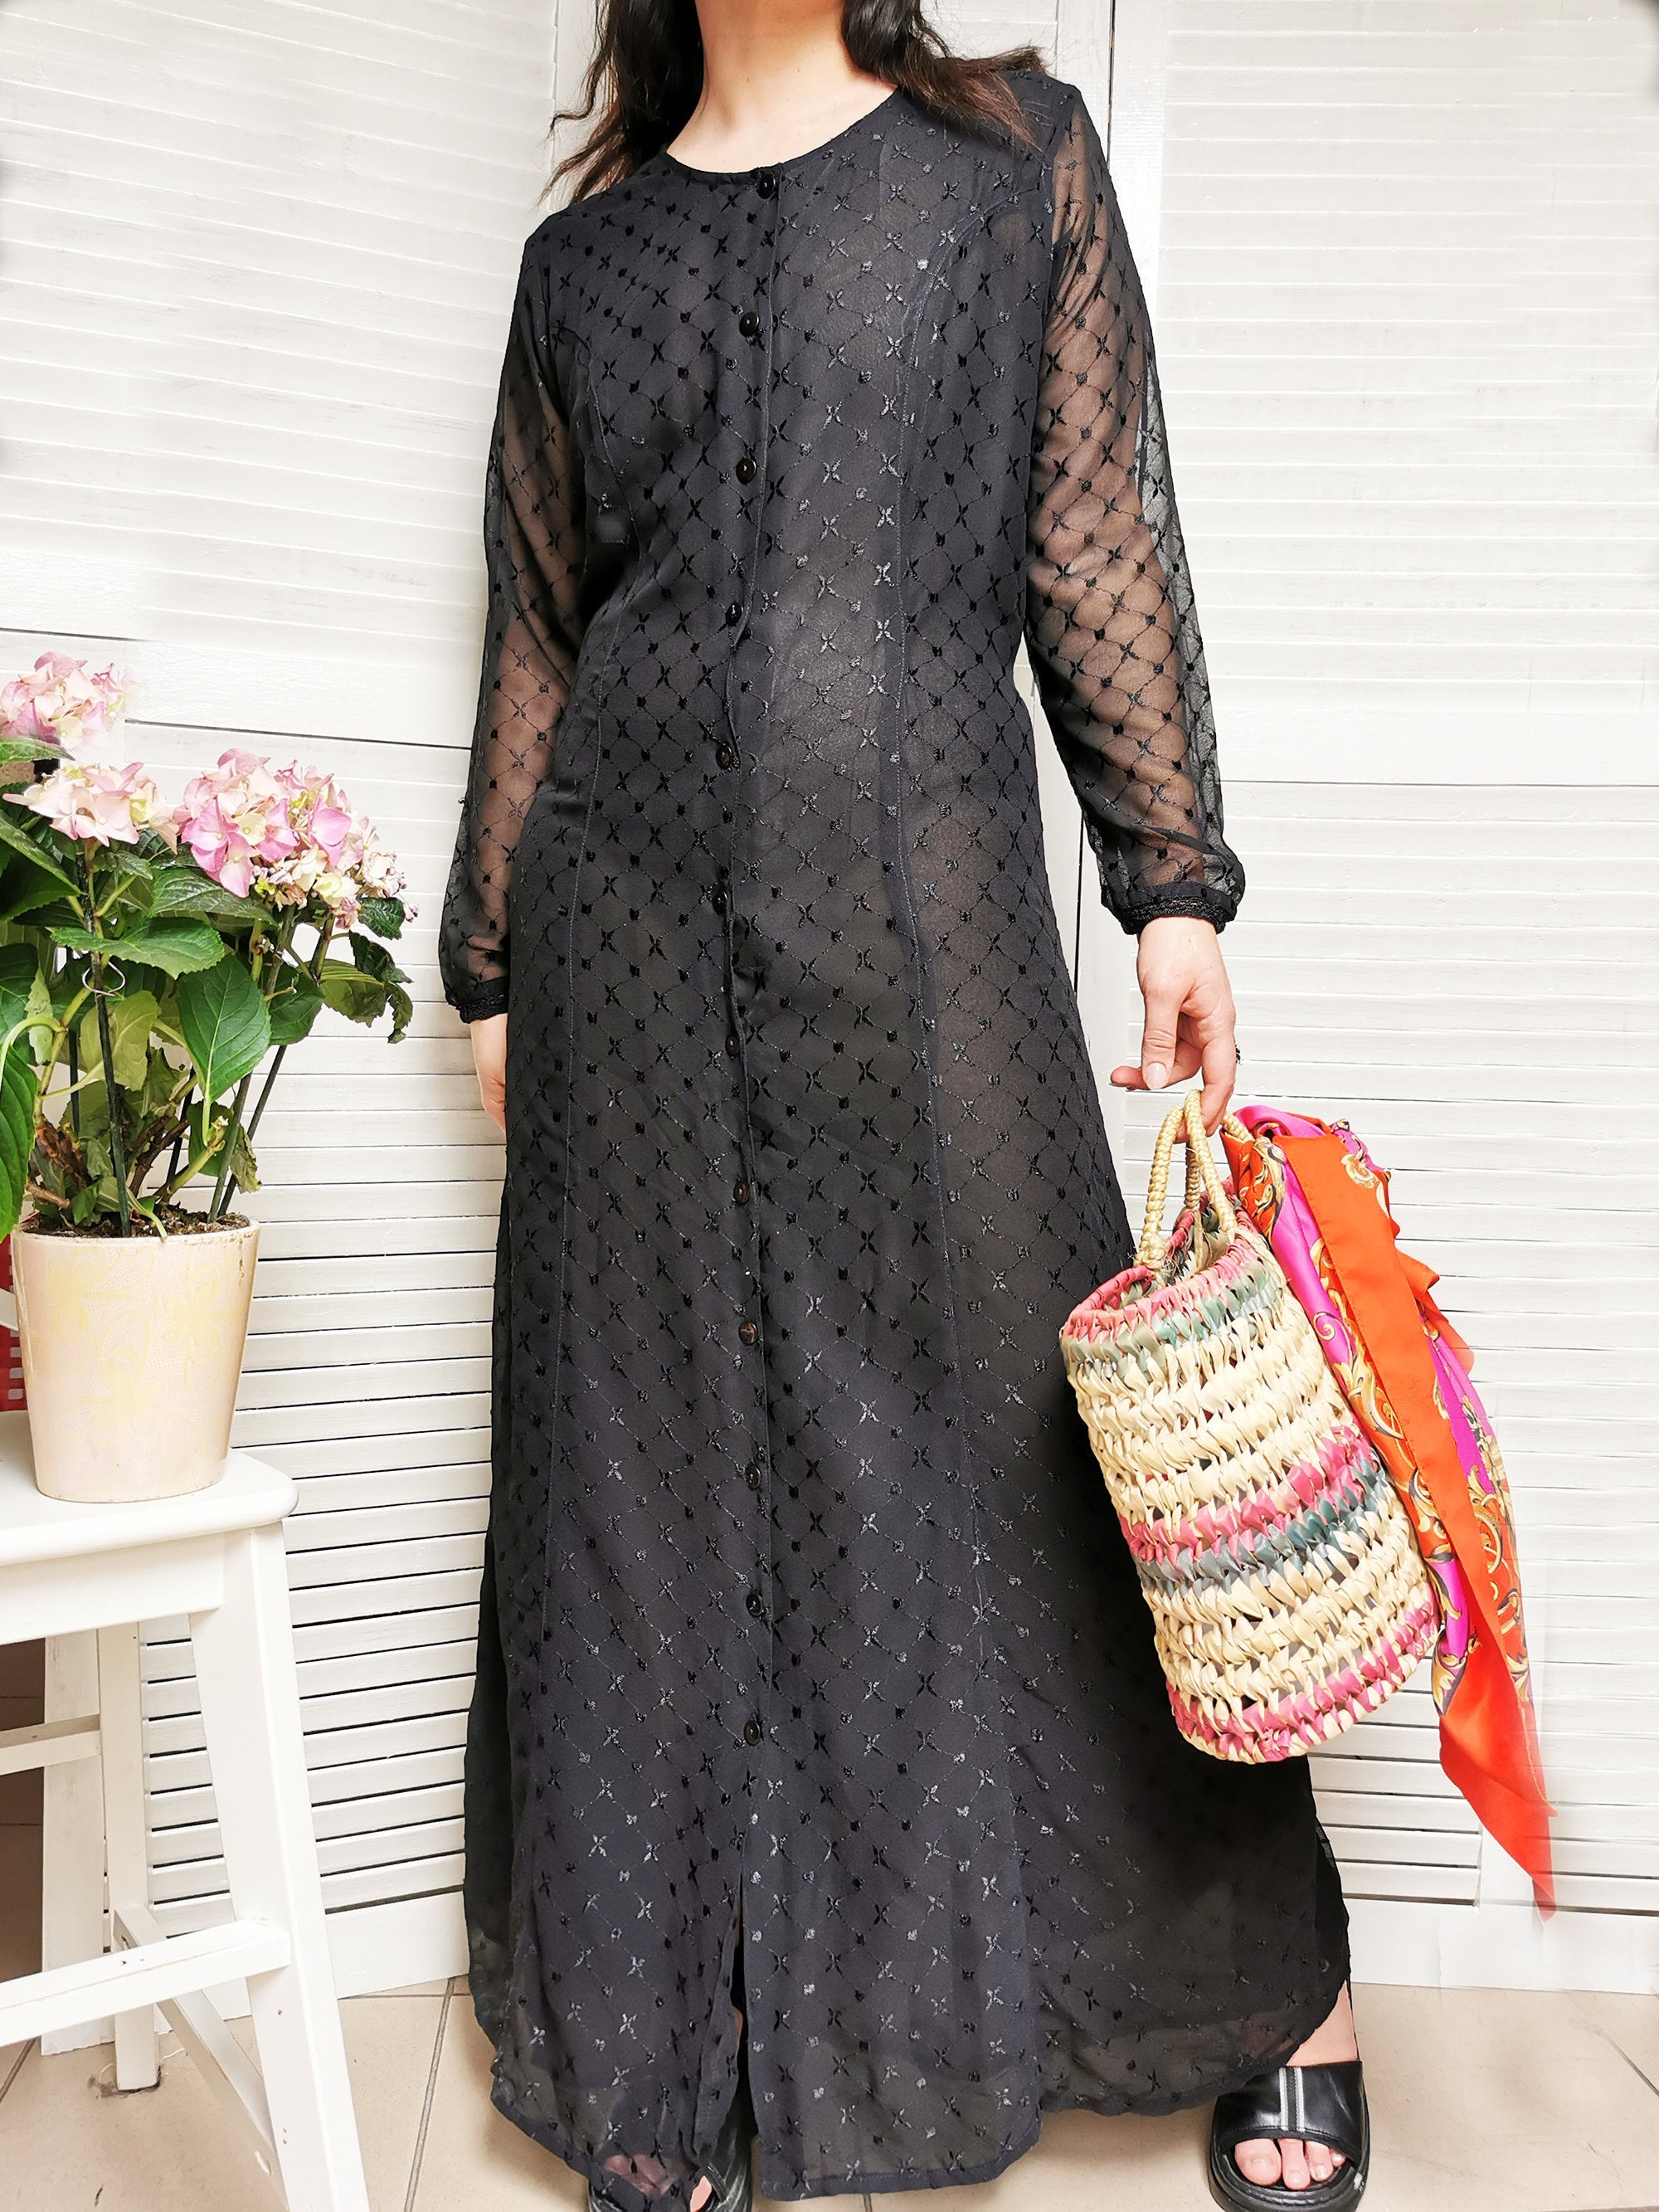 Vintage 90s black sheer embroidery button down maxi dress